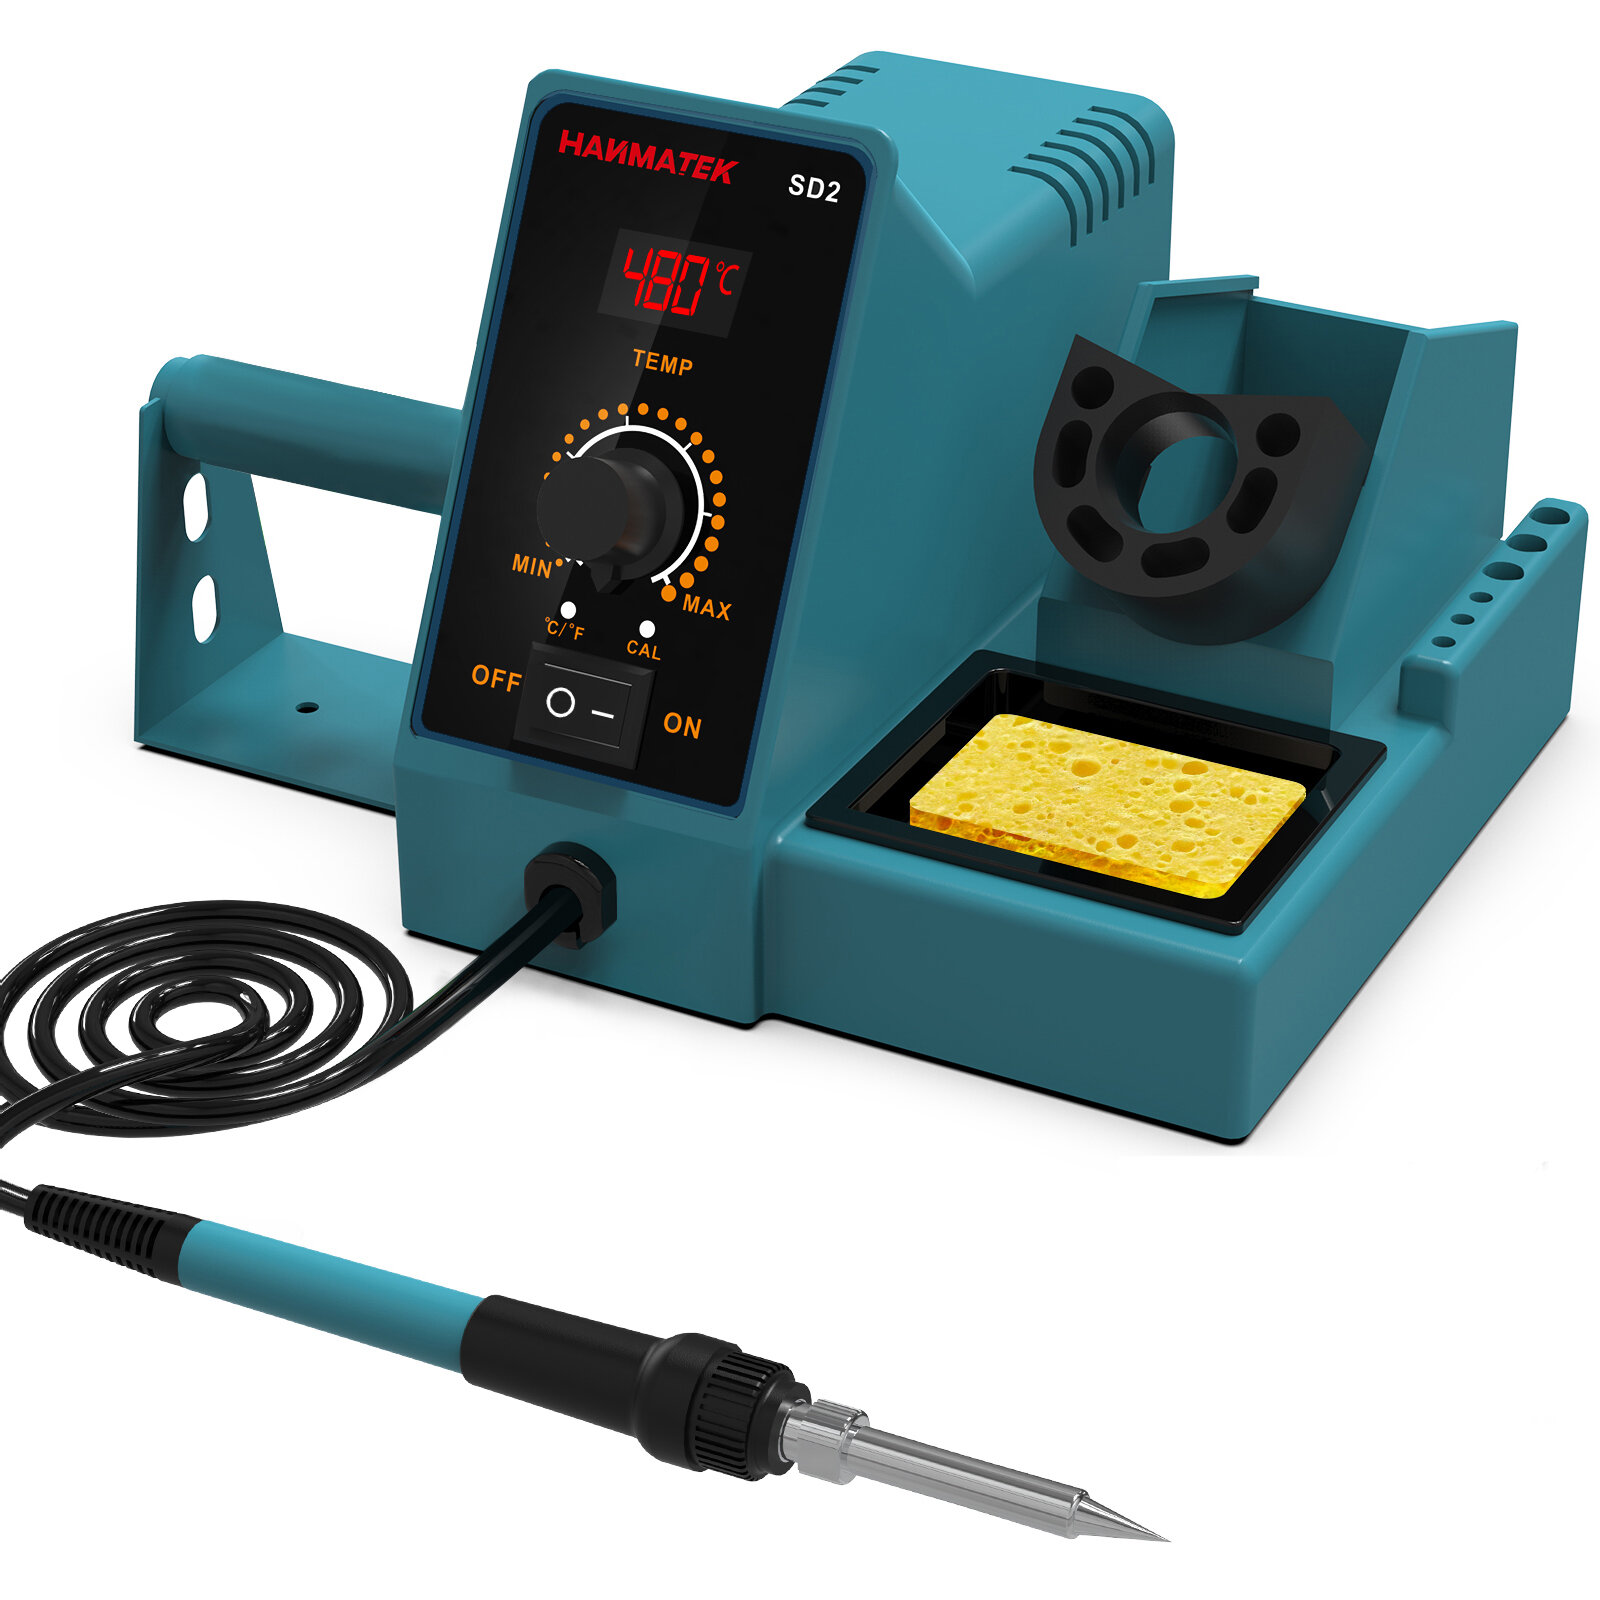 

HANMATEK SD1/SD2 Soldering Iron Station 60W 392℉-896℉ Fast Heat PID Technology Stable Temperature Comes with Essential A